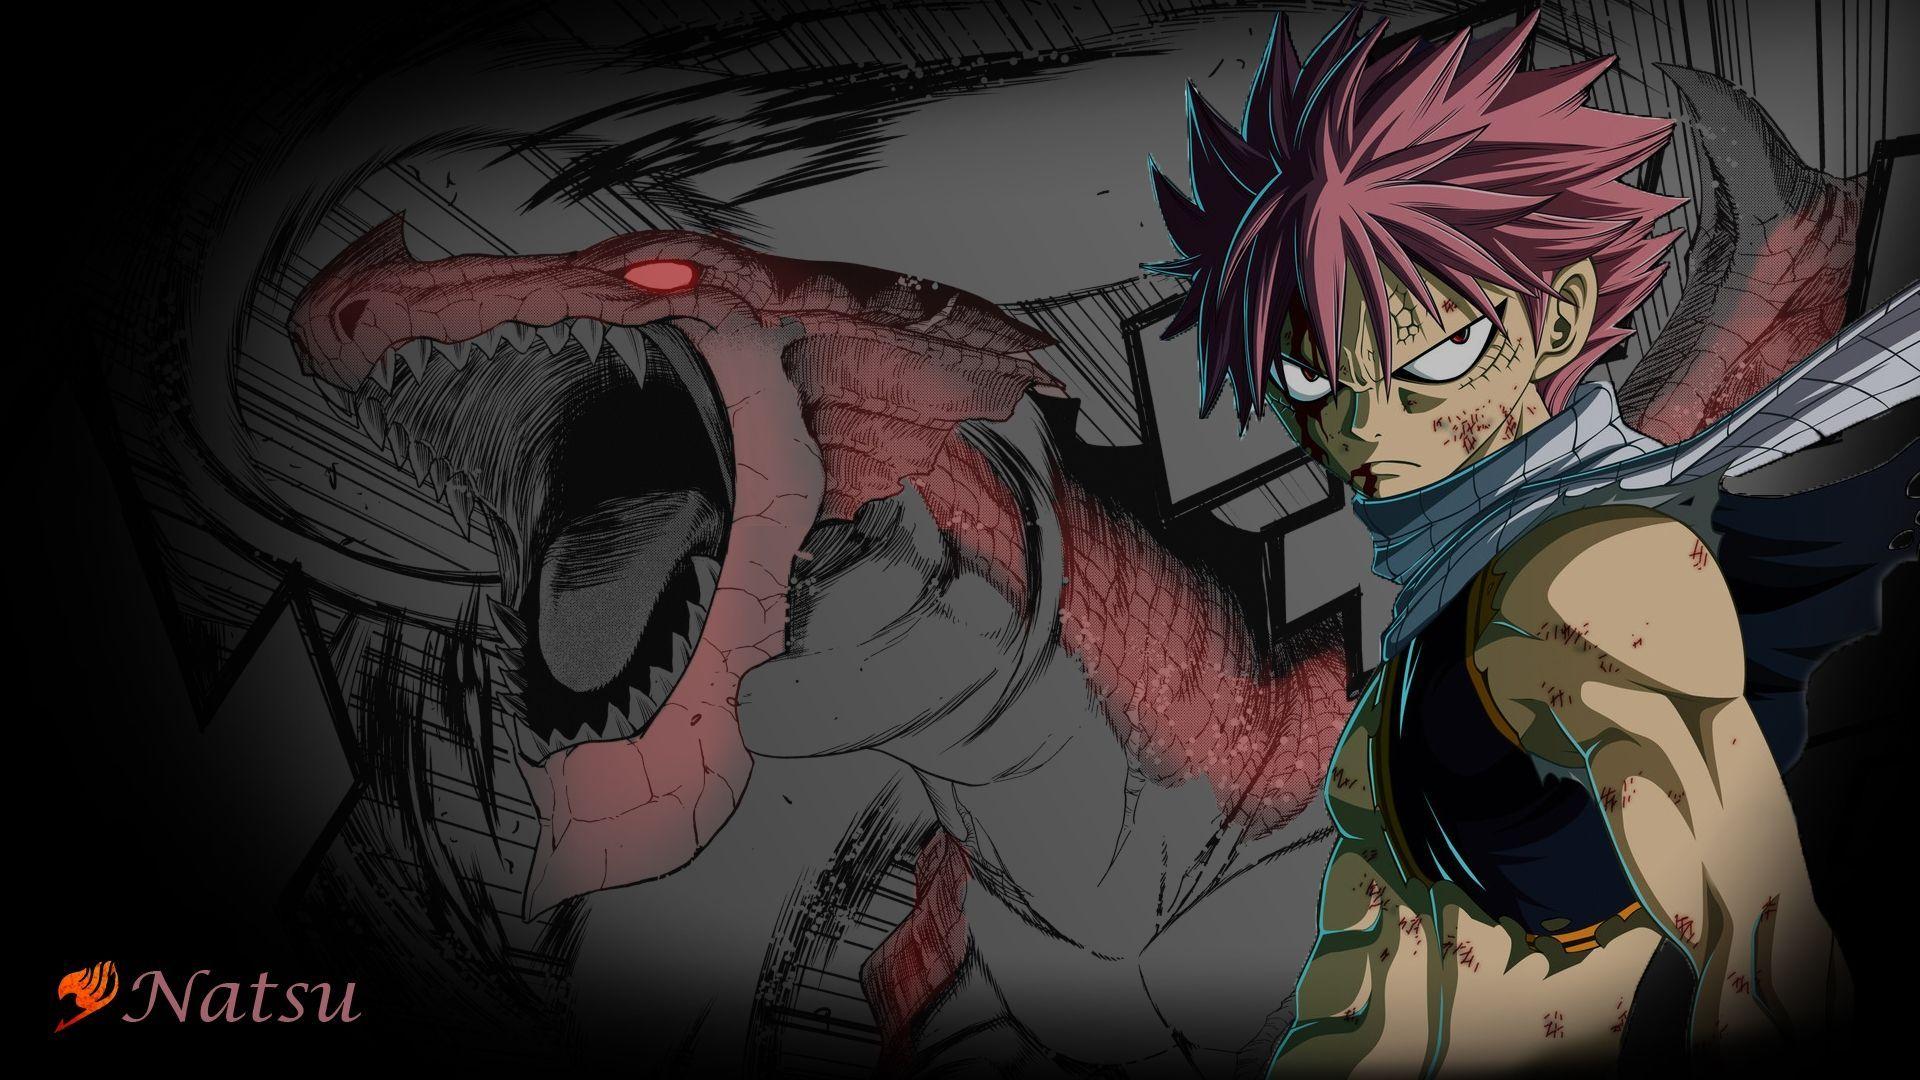 Wallpapers For > Fairy Tail Natsu Wallpapers Hd 1920x1080